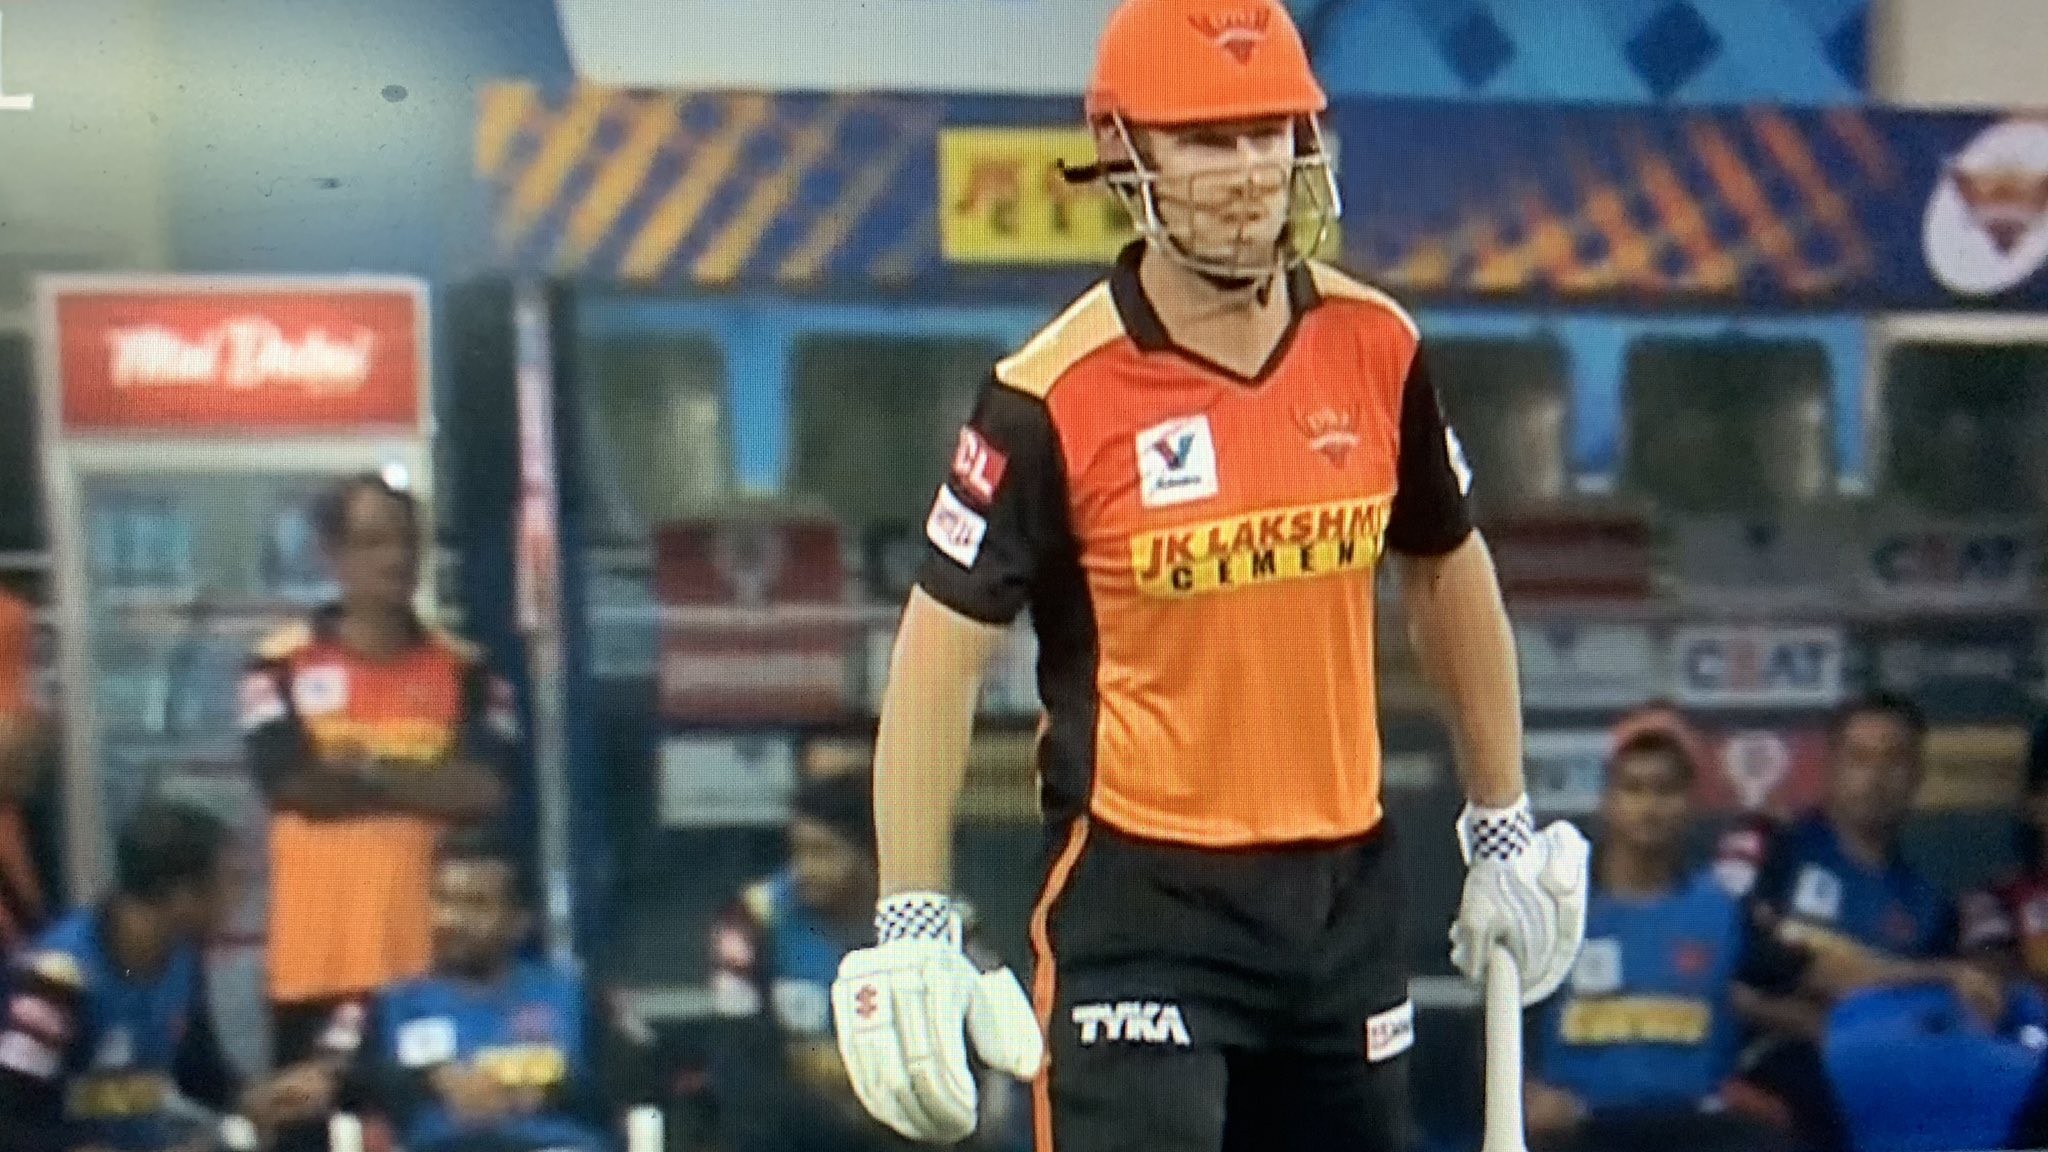 IPL 2020: Mitchell Marsh set to be ruled out of tournament after twisting ankle, says report 